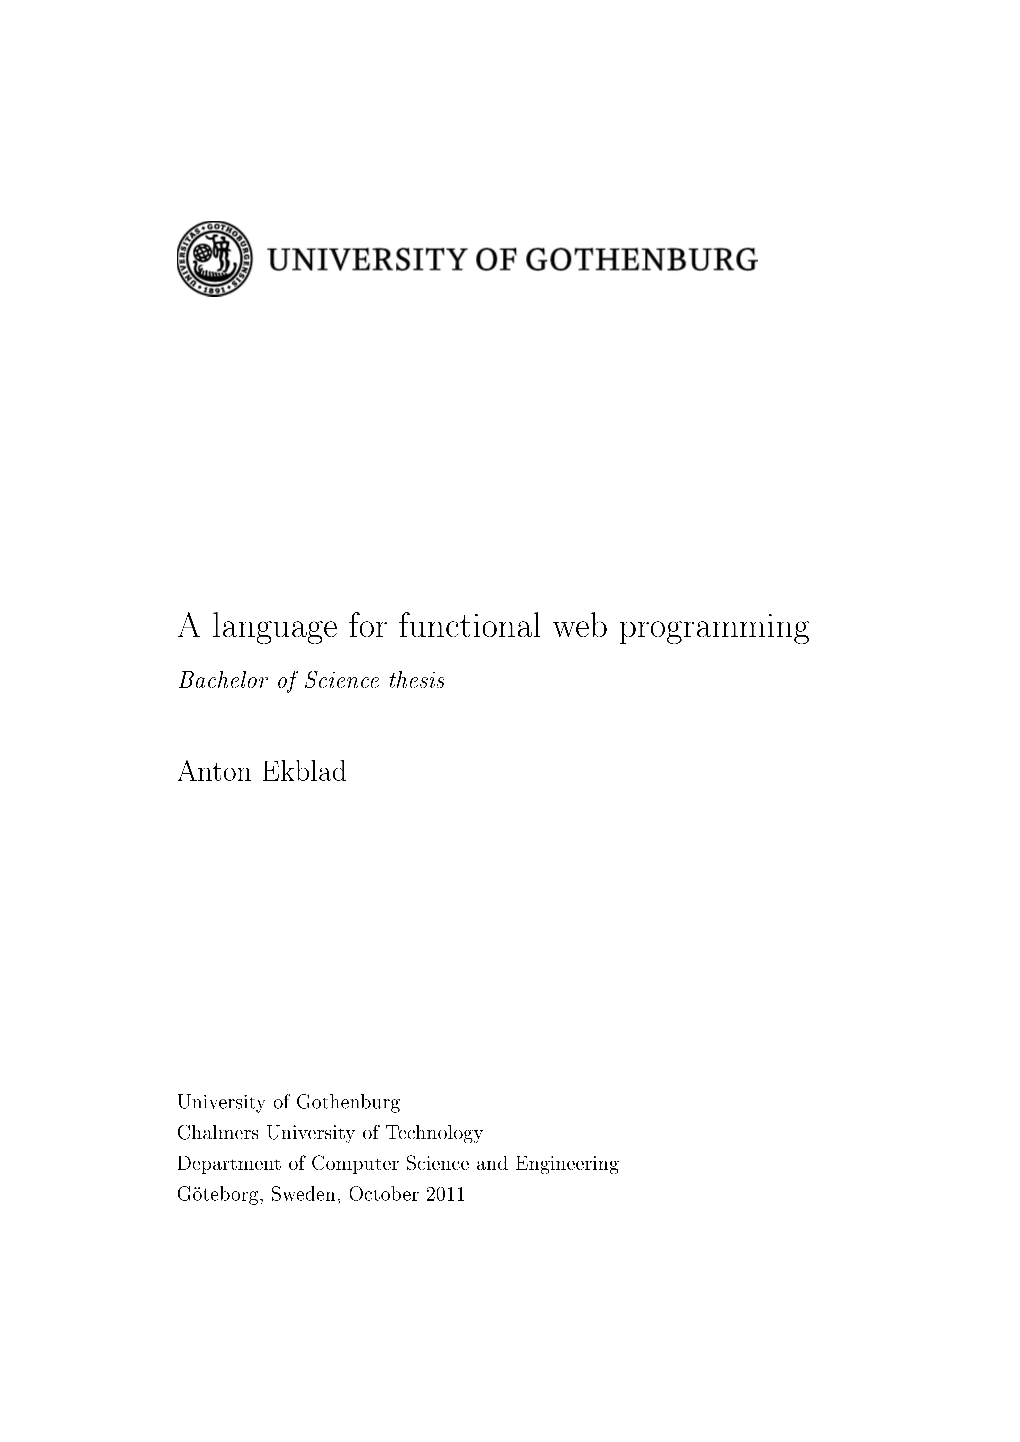 A Language for Functional Web Programming